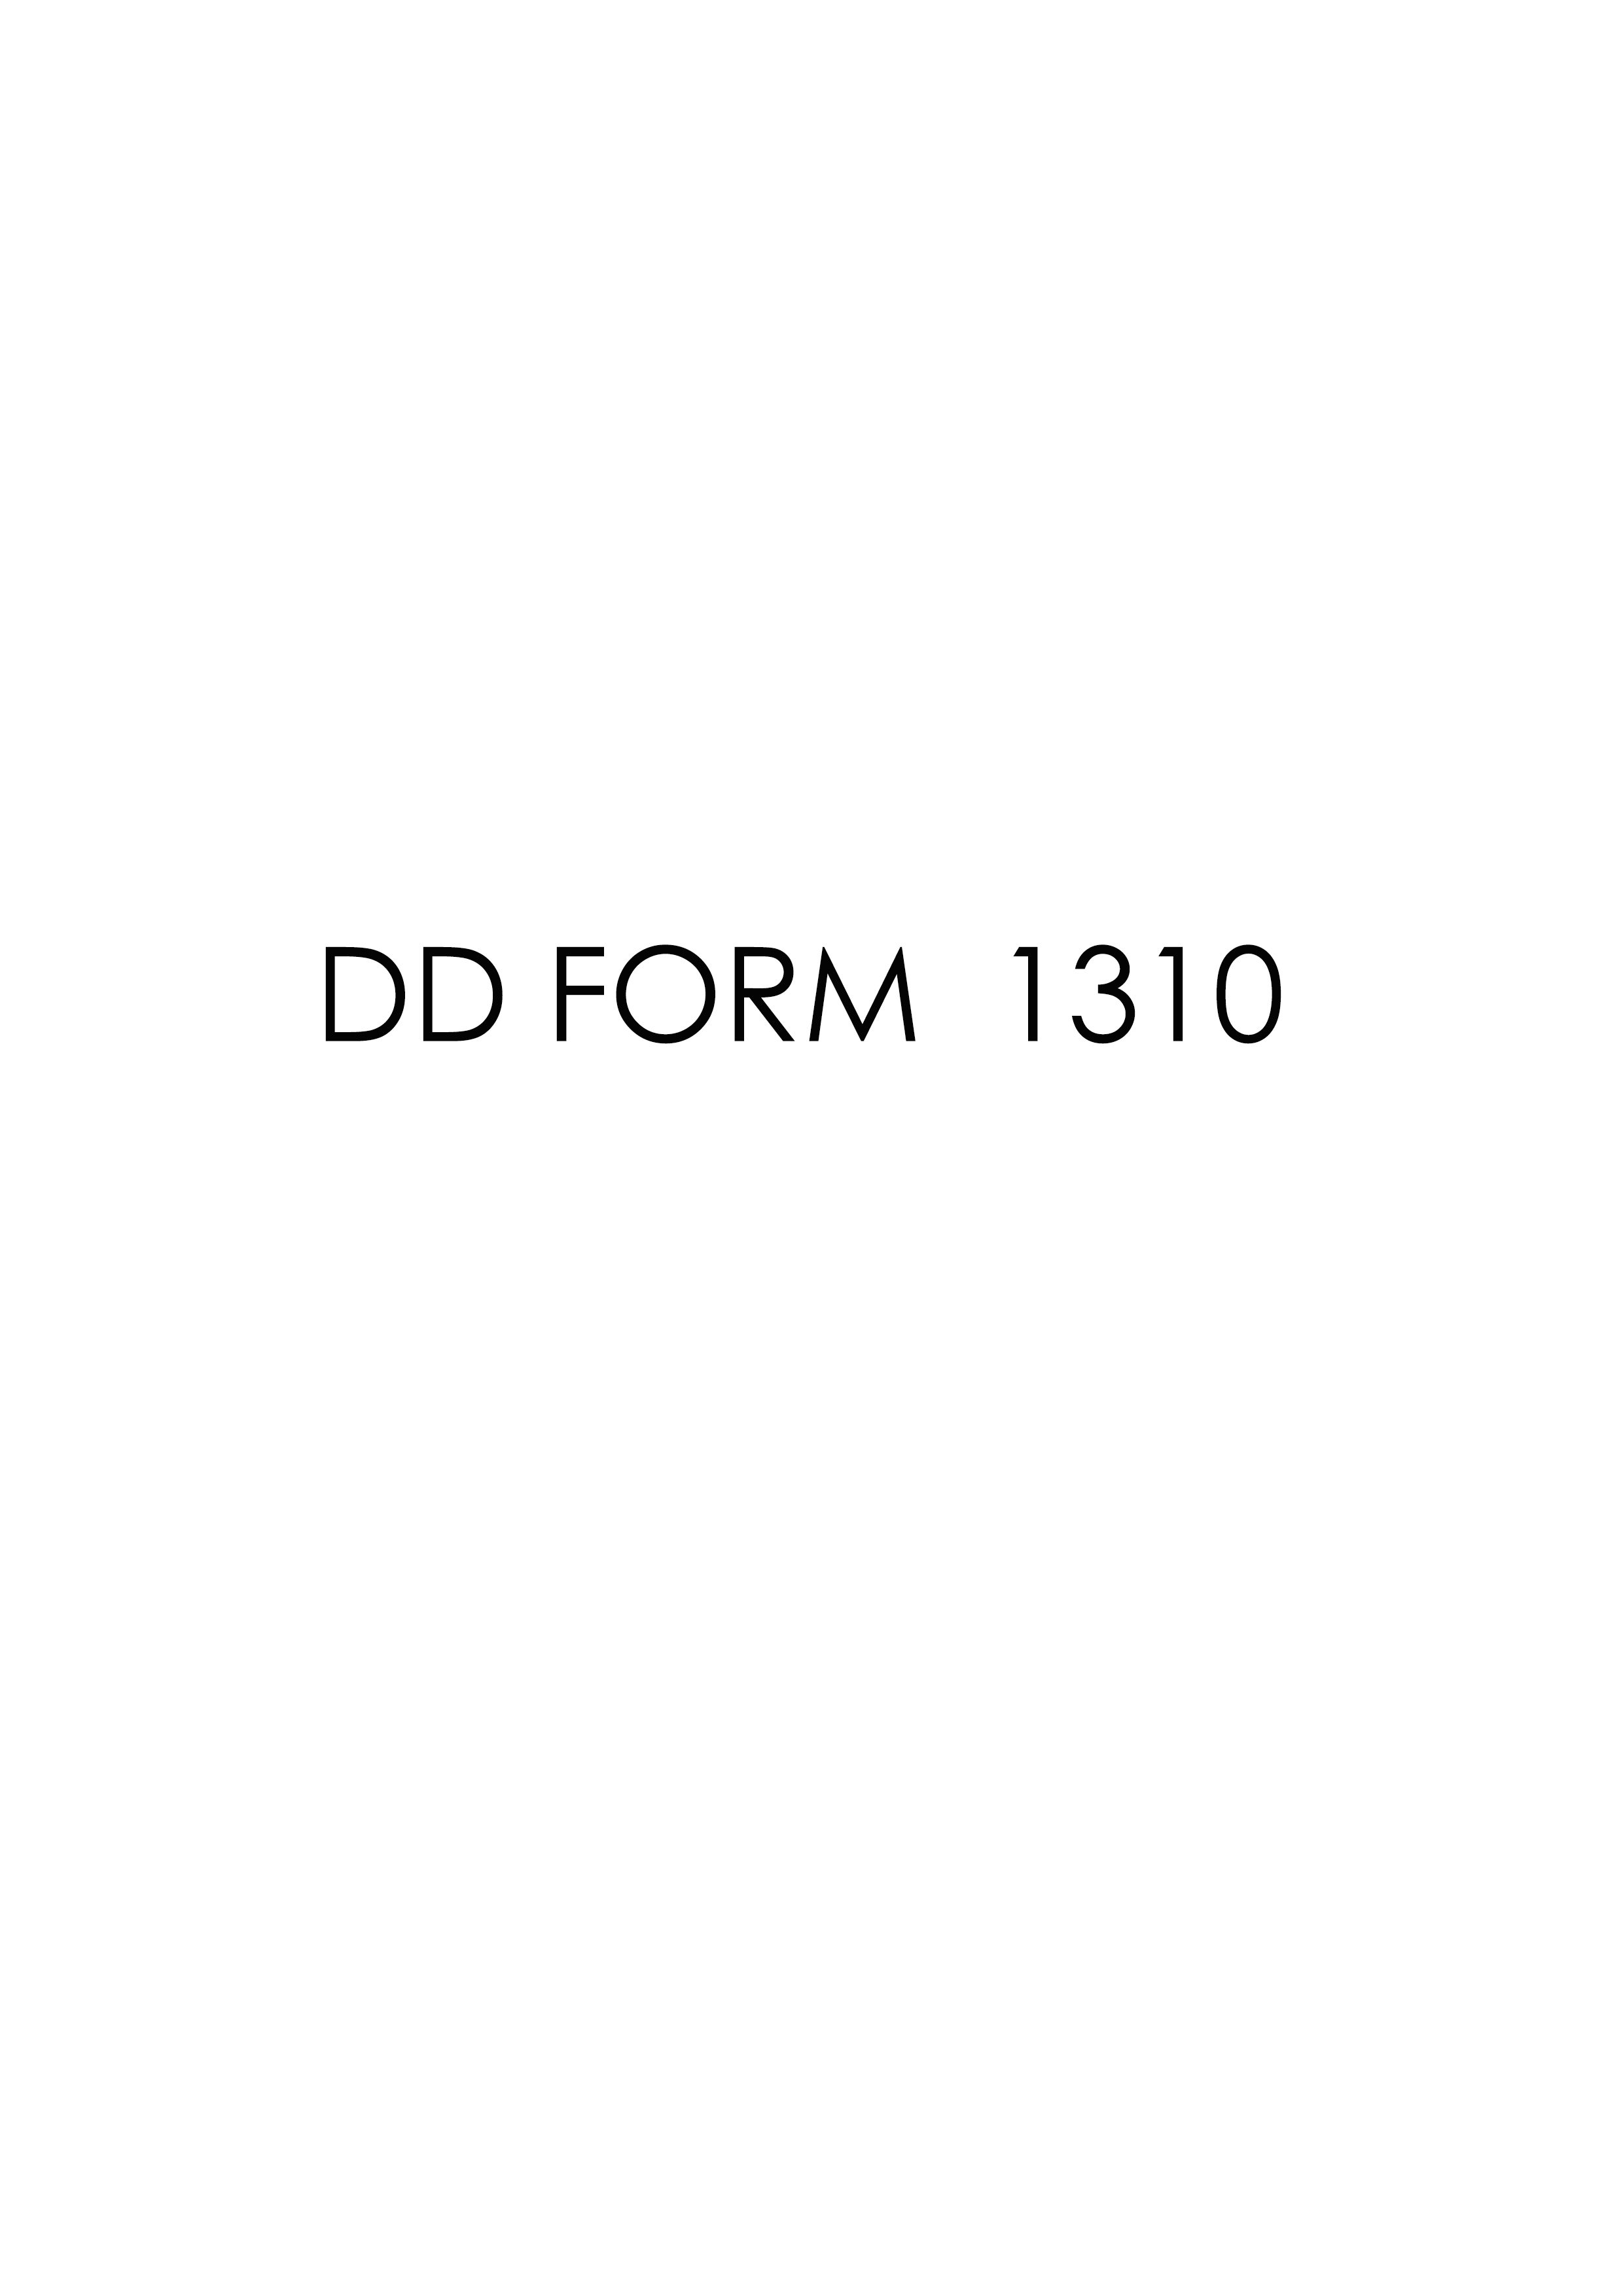 Download Fillable dd Form 1310